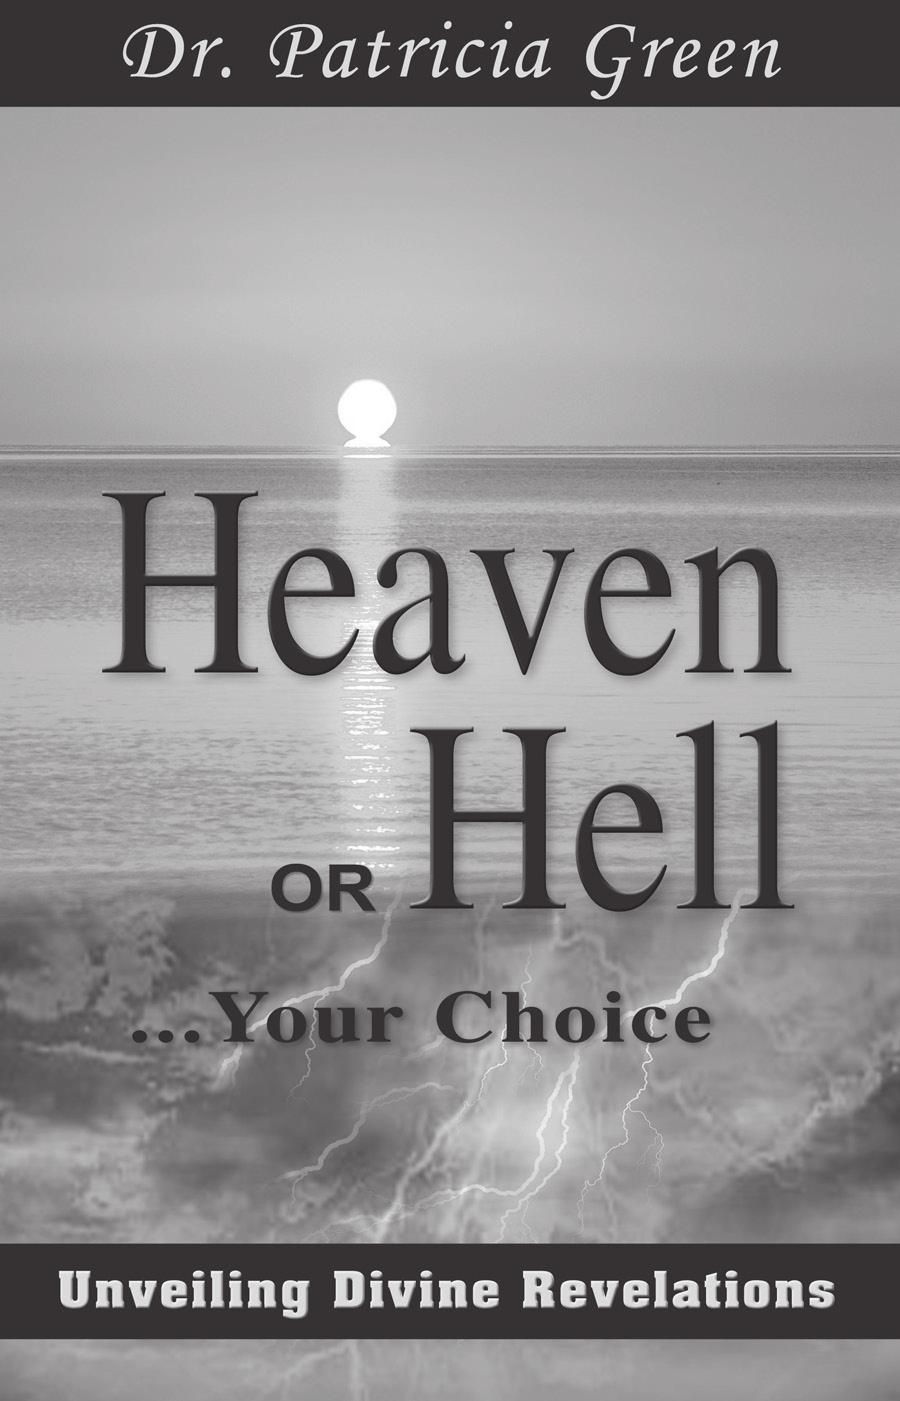 N e e d a d d i t i o n a l c o p i e s? To order more copies of Heaven OR Hell.